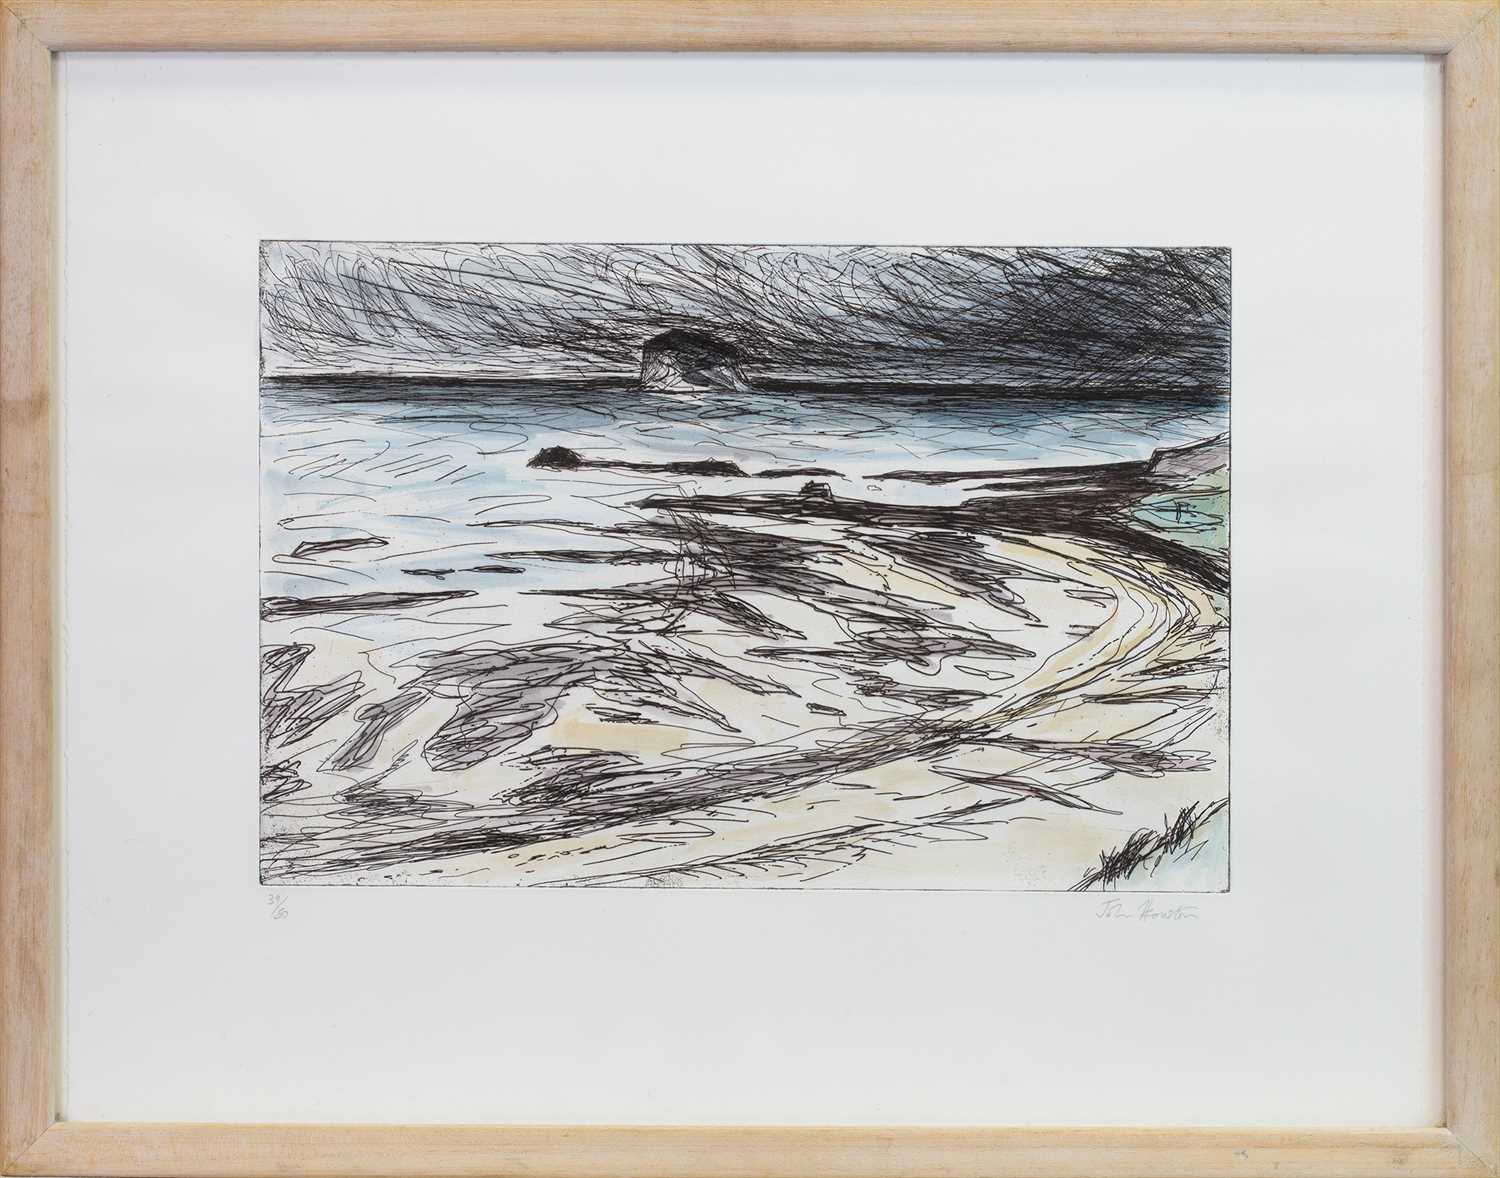 Lot 112 - BEFORE THE STORM, AN ETCHING BY JOHN HOUSTON